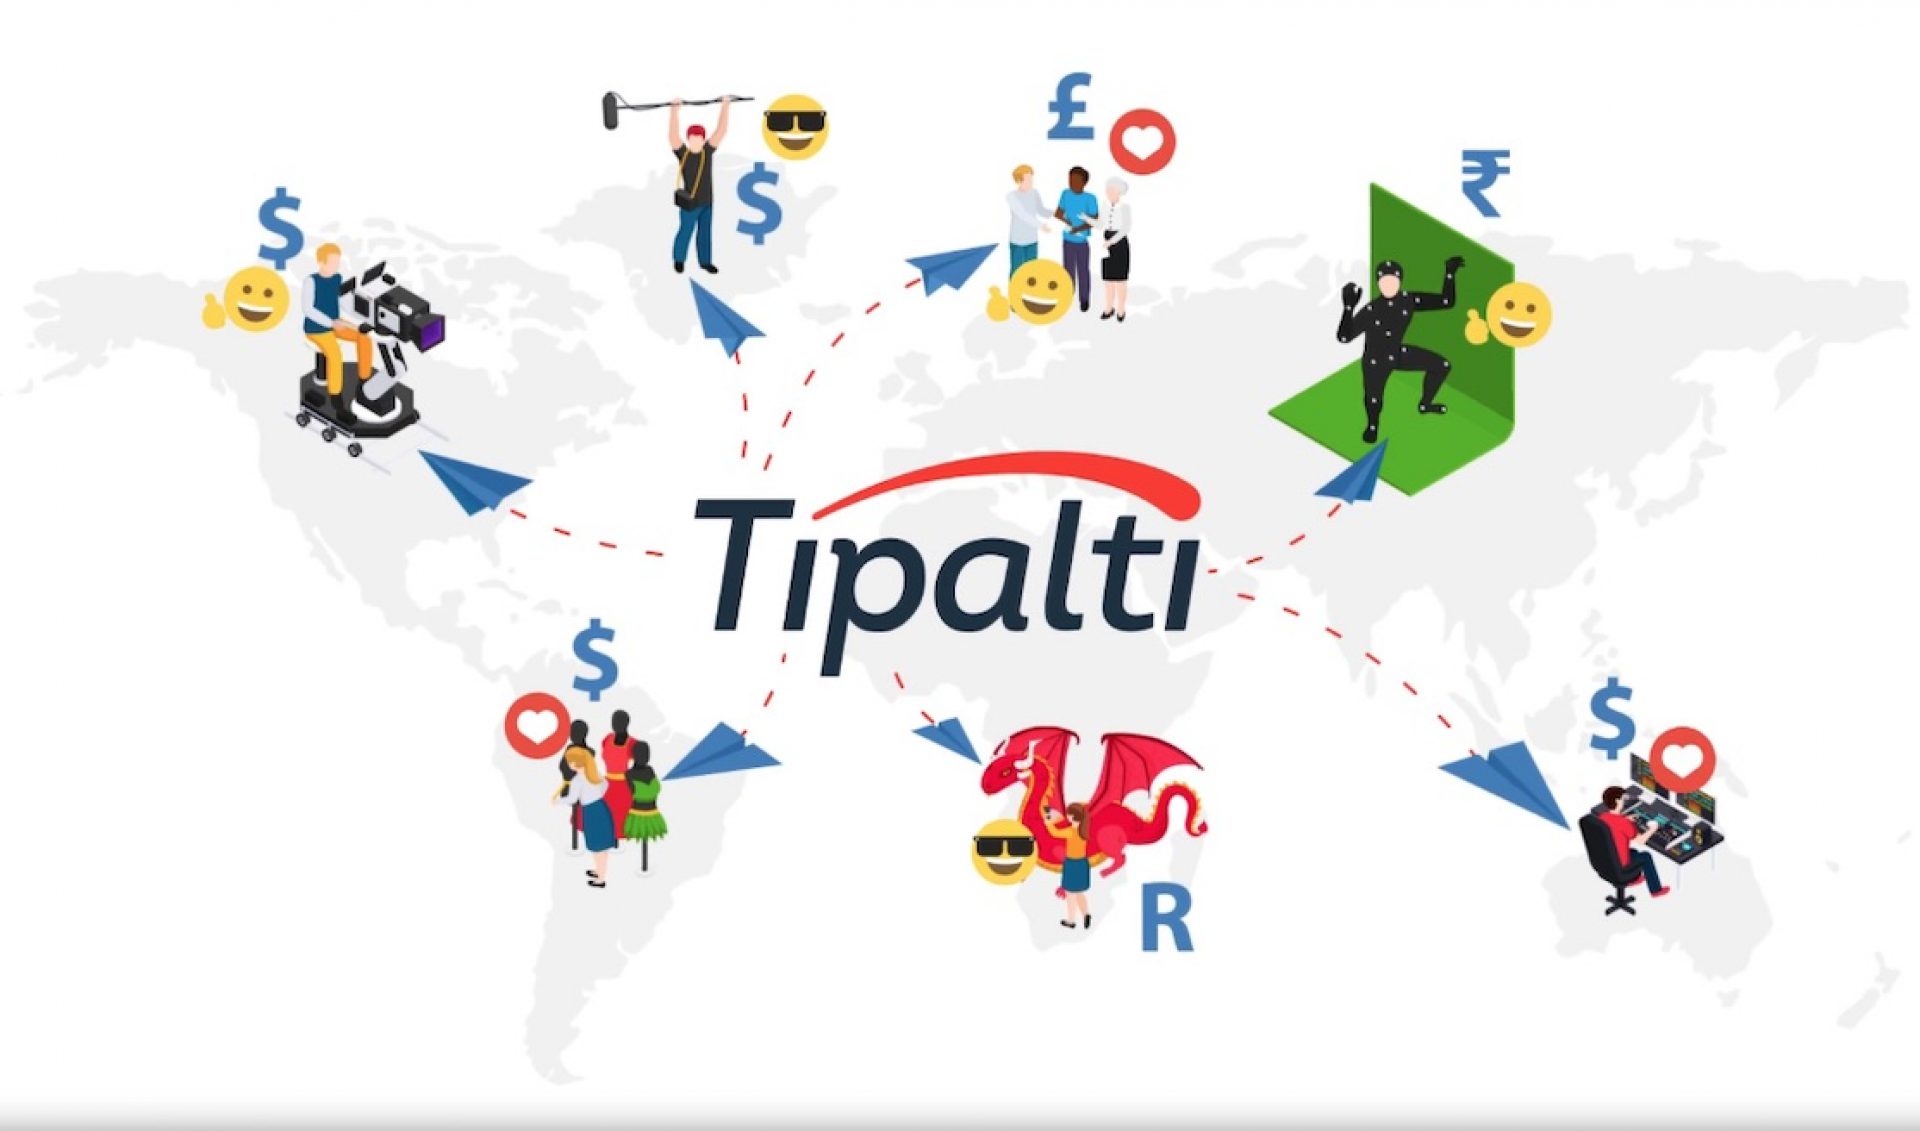 Tipalti Works Behind The Scenes To Ensure Creators On Twitch, Wattpad, Vimeo, And More Get Paid On Time